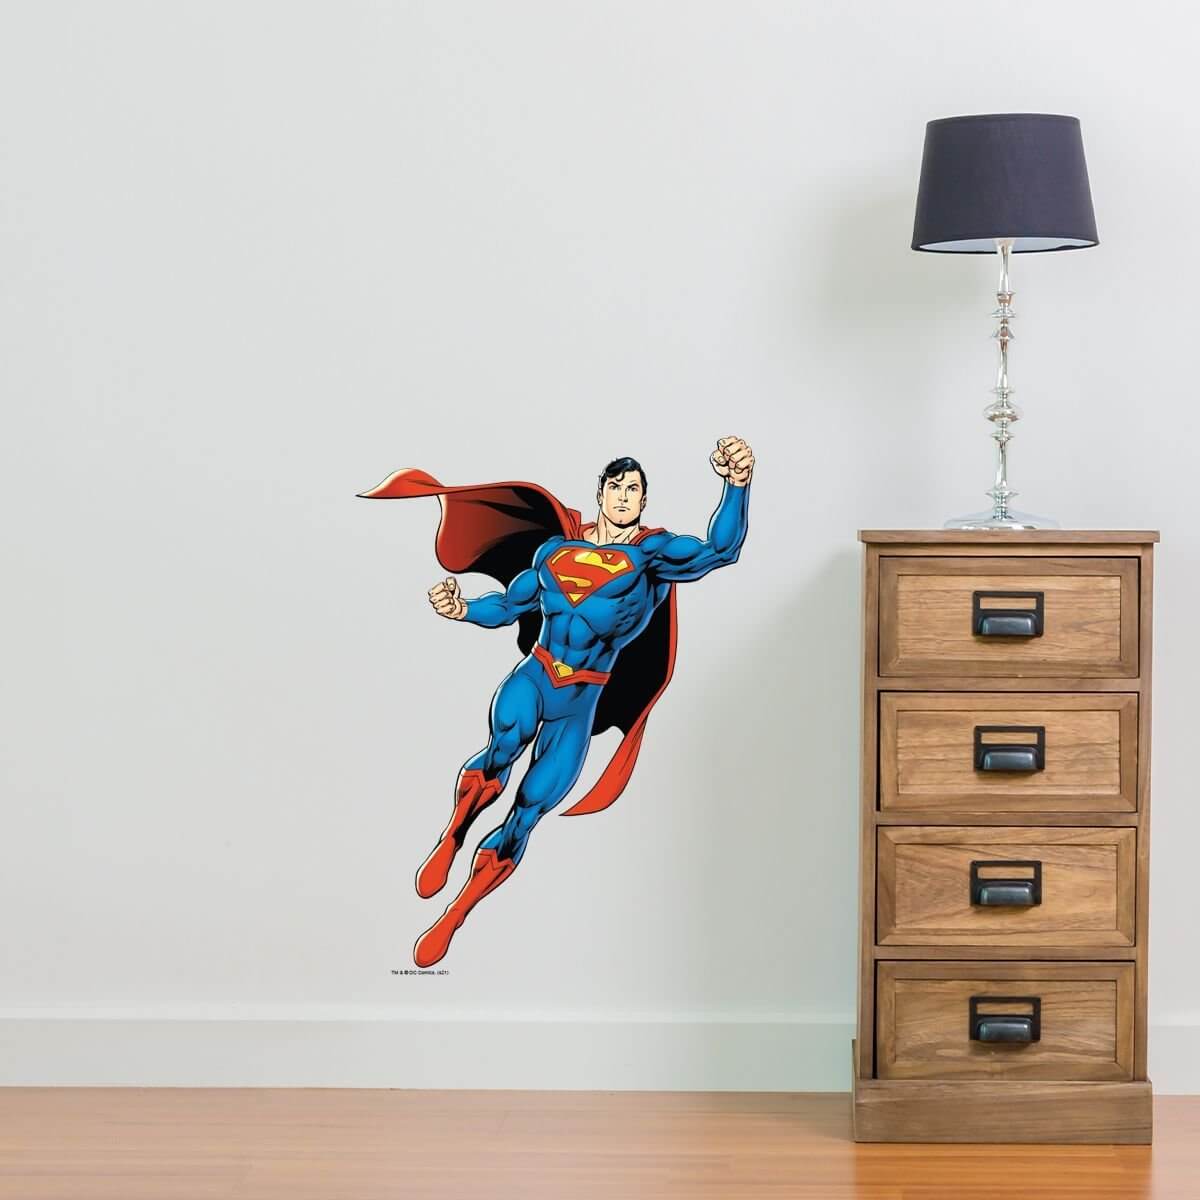 Kismet Decals Superman Air Attack Licensed Wall Sticker - Easy DIY Justice League Home & Room Decor Wall Art - Kismet Decals